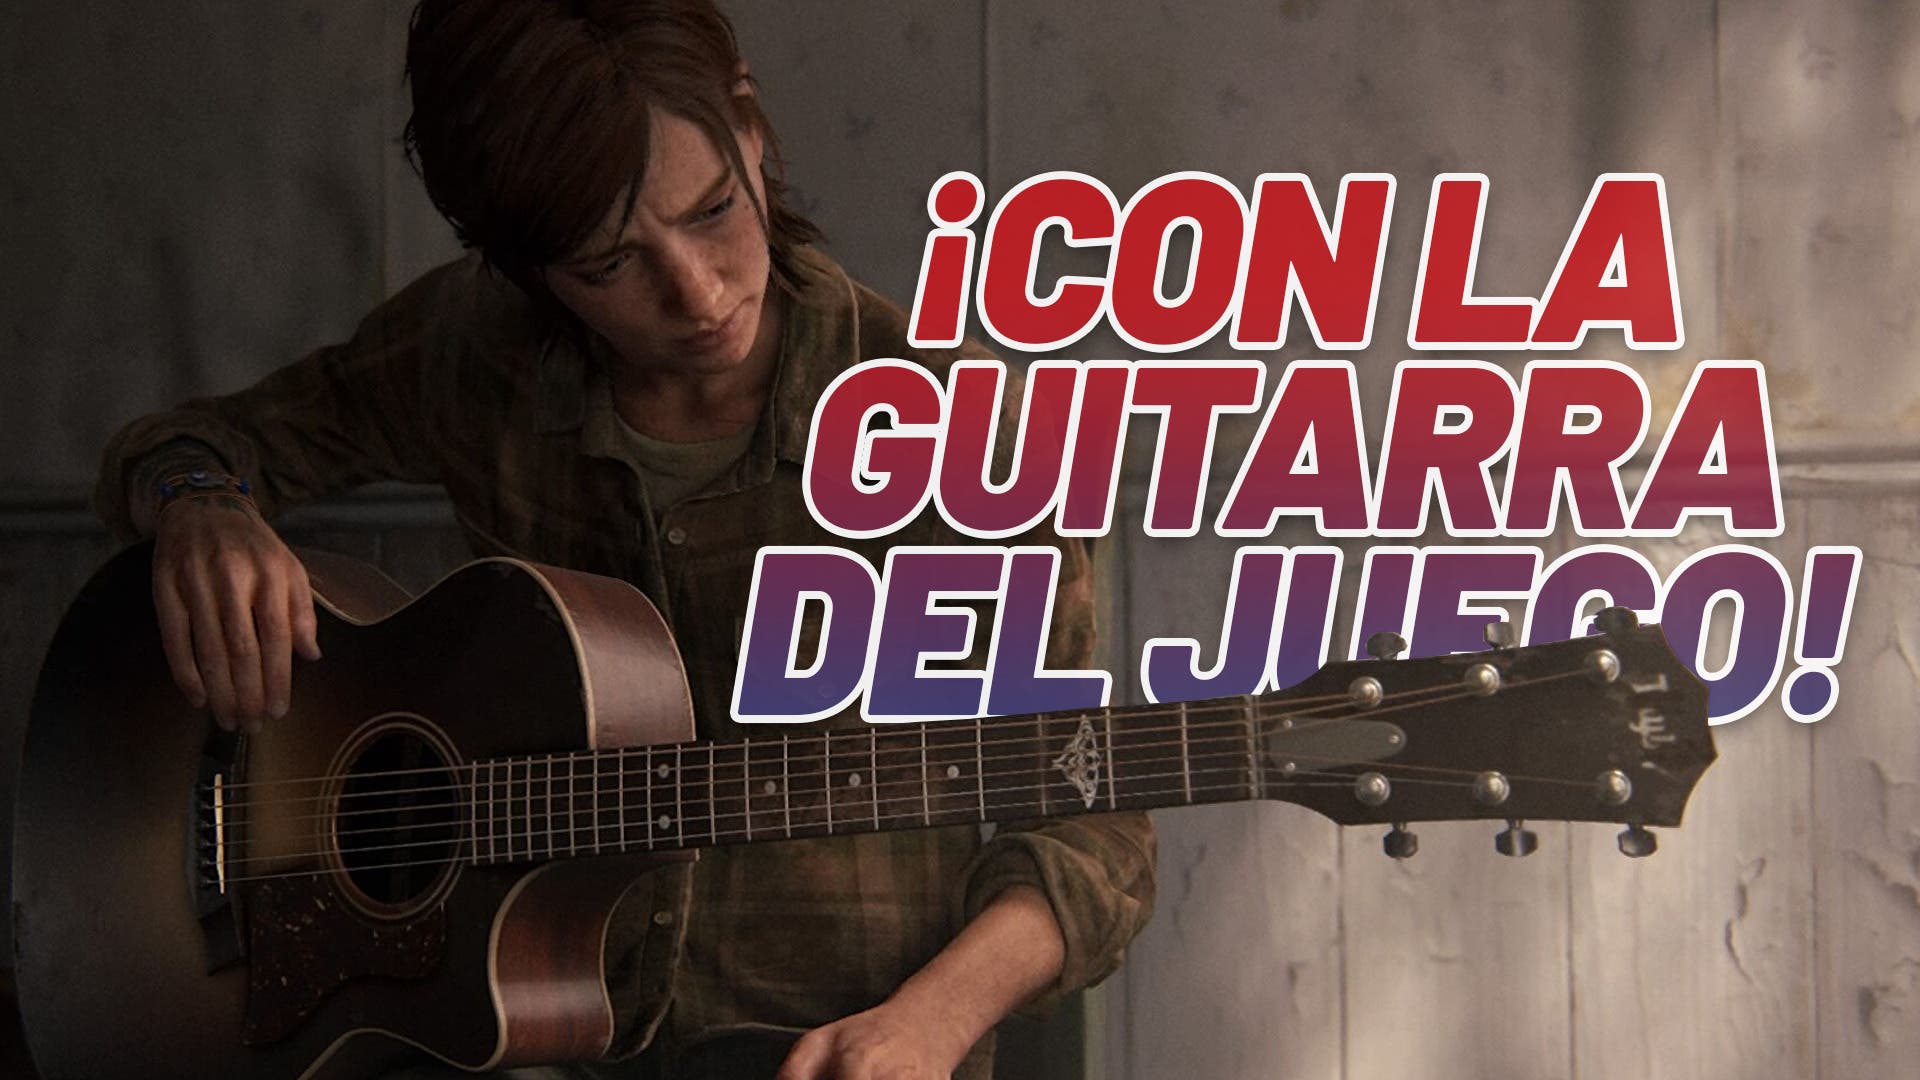 This is how amazing The Last of Us main theme played with guitar in game is